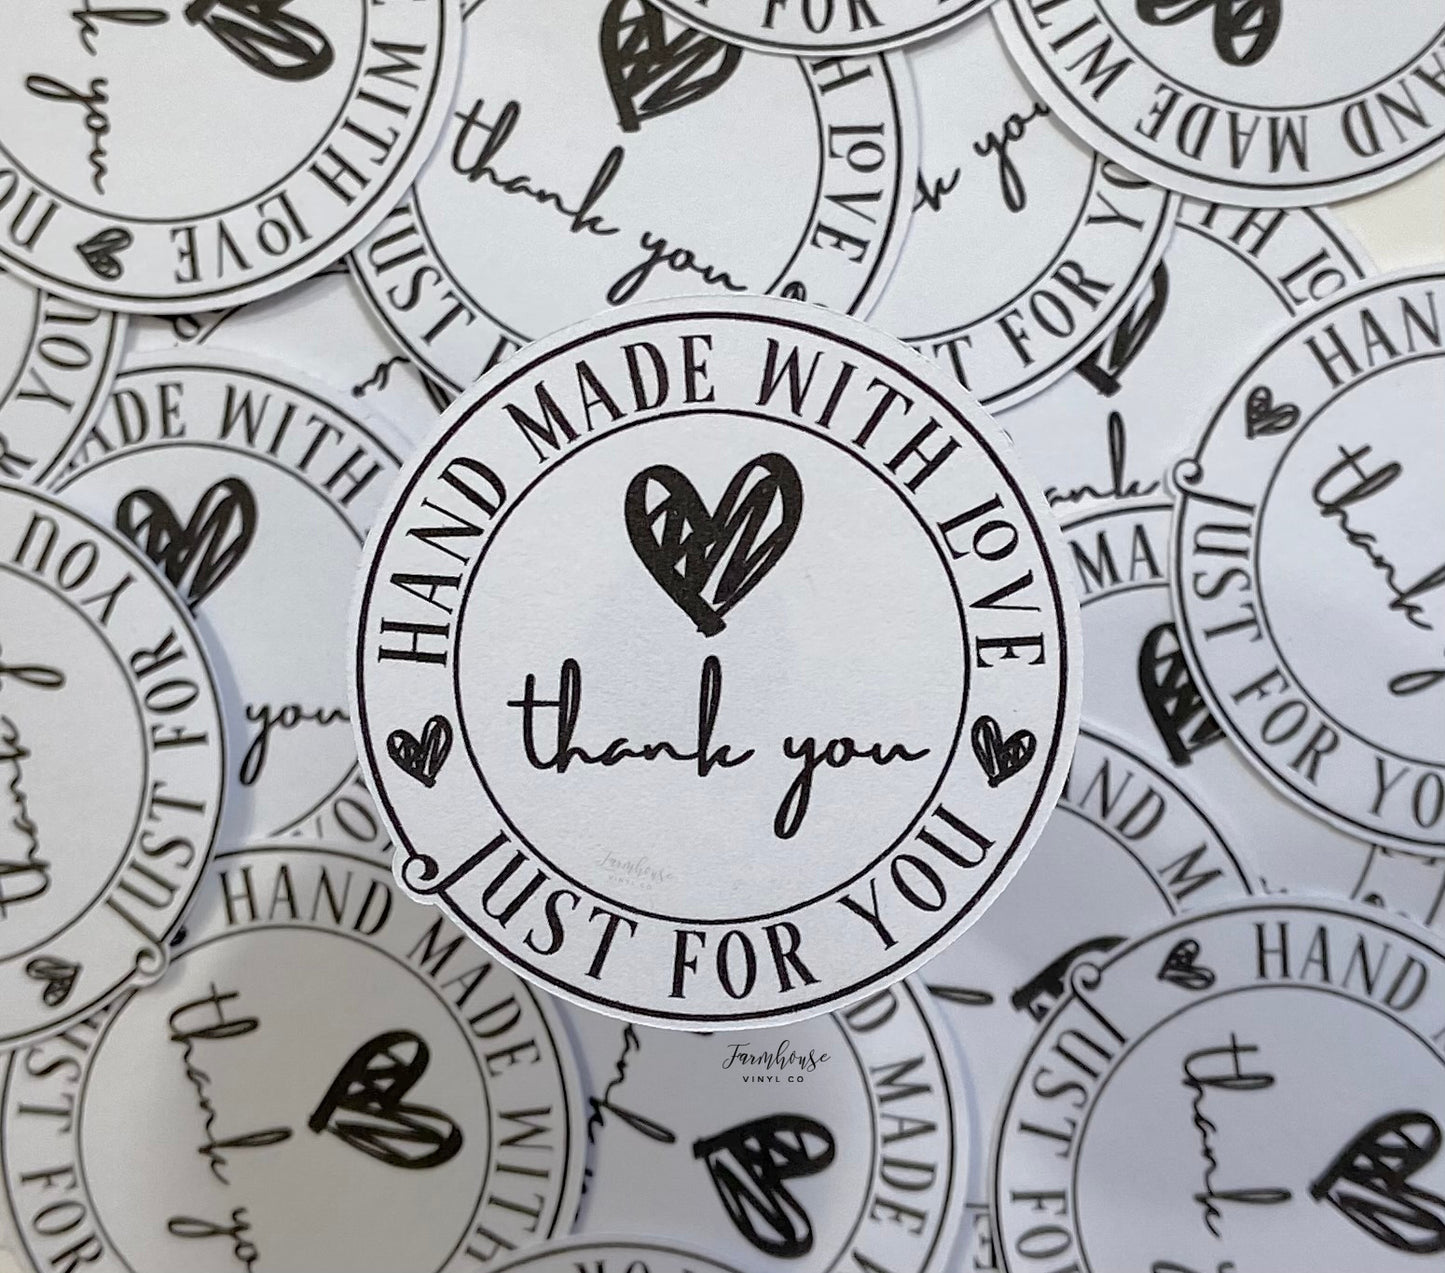 Hand Made With Love Just for You Thank You Stickers - Farmhouse Vinyl Co